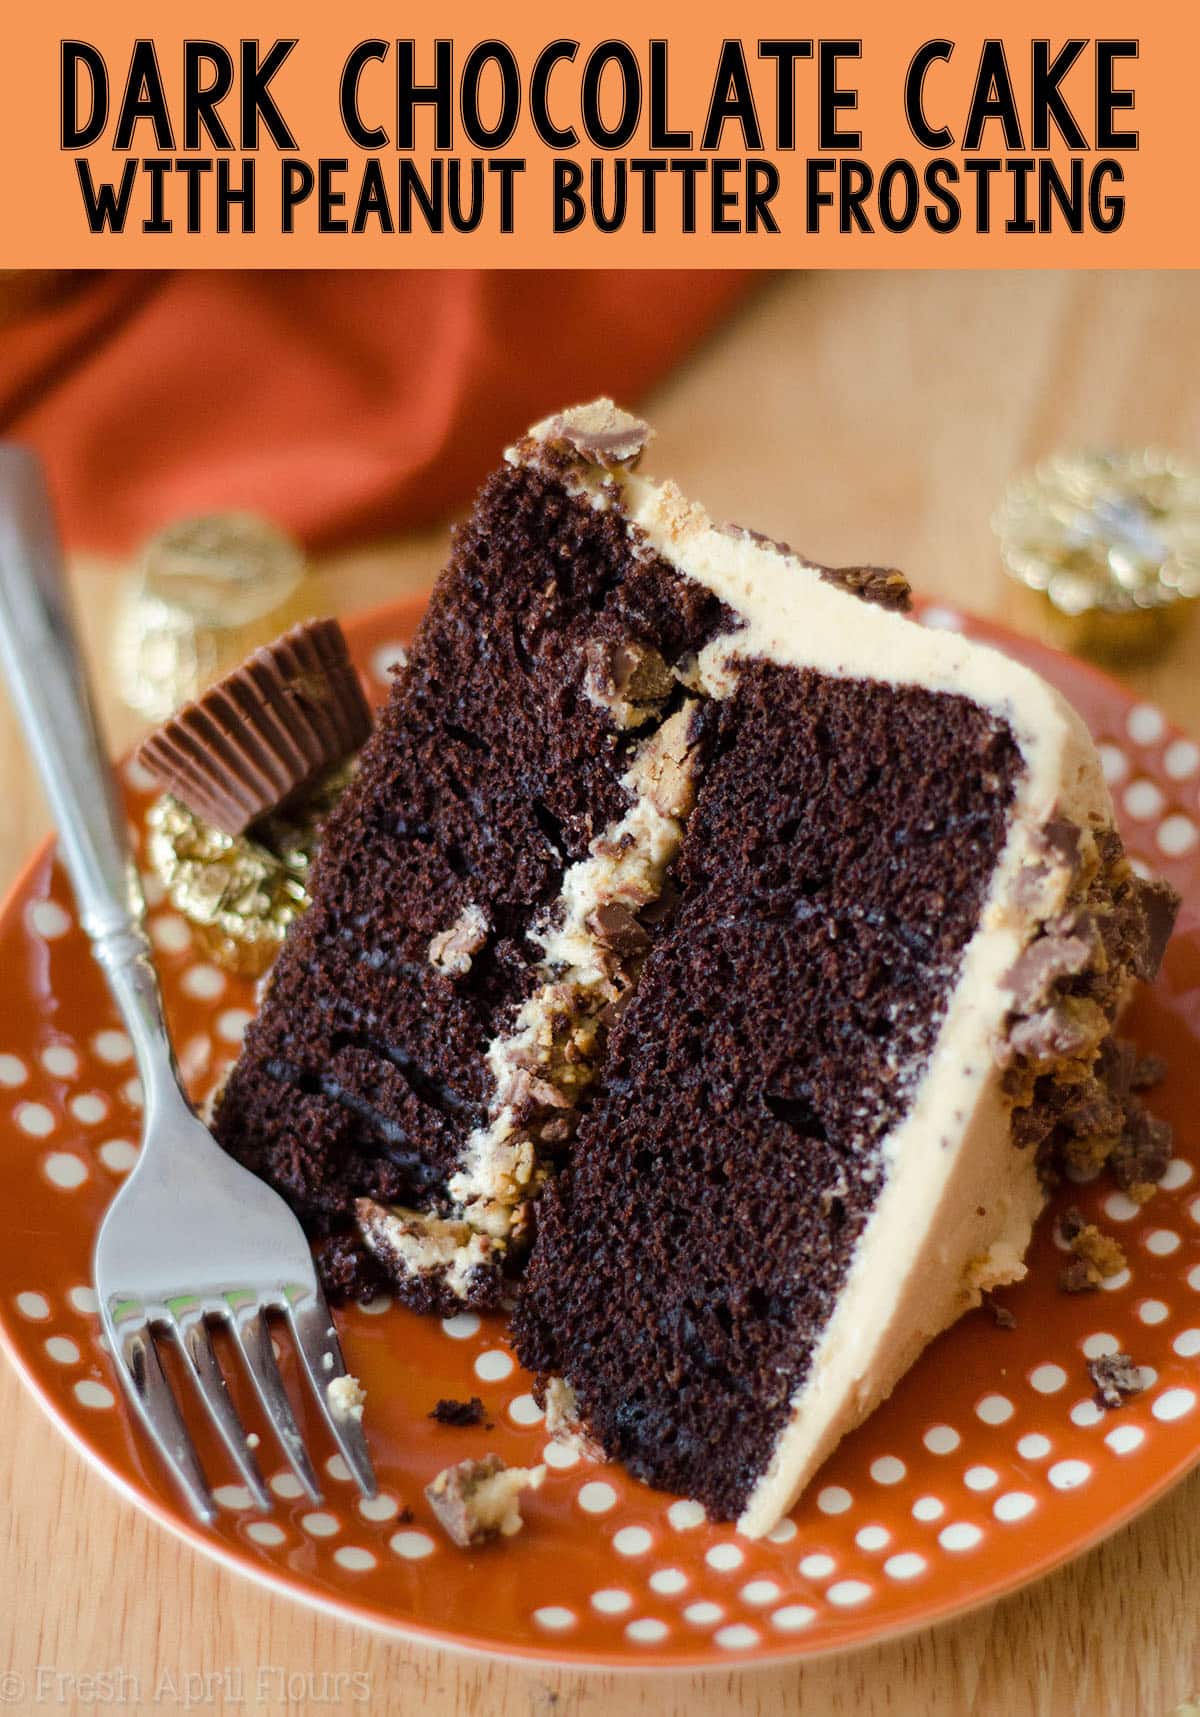 An easy two-layer dark chocolate cake covered in creamy, dreamy peanut butter frosting, all from scratch! via @frshaprilflours